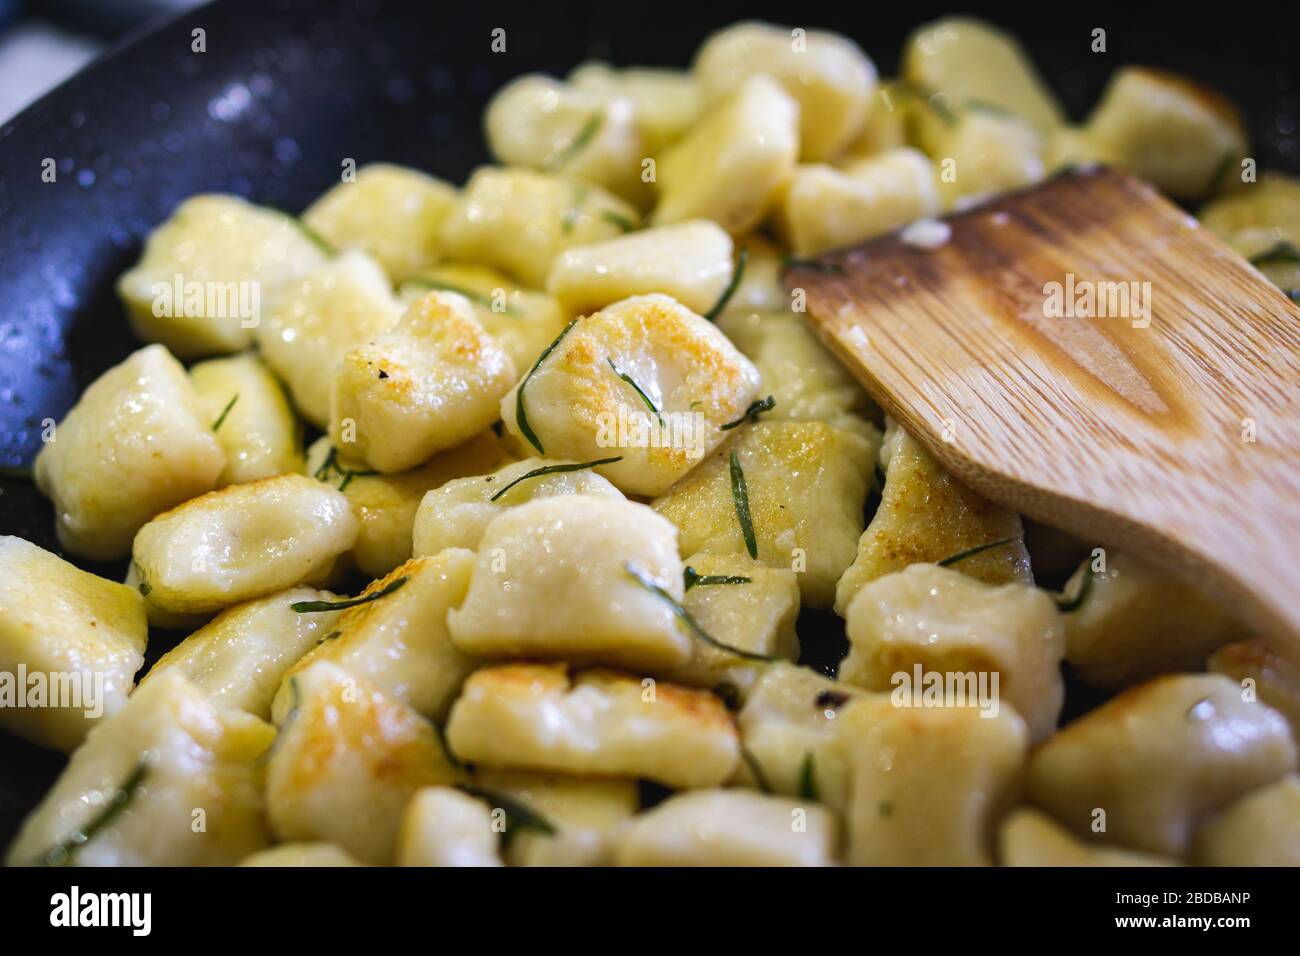 Home made gnocchi with goats cheese and parsley. Stock Photo